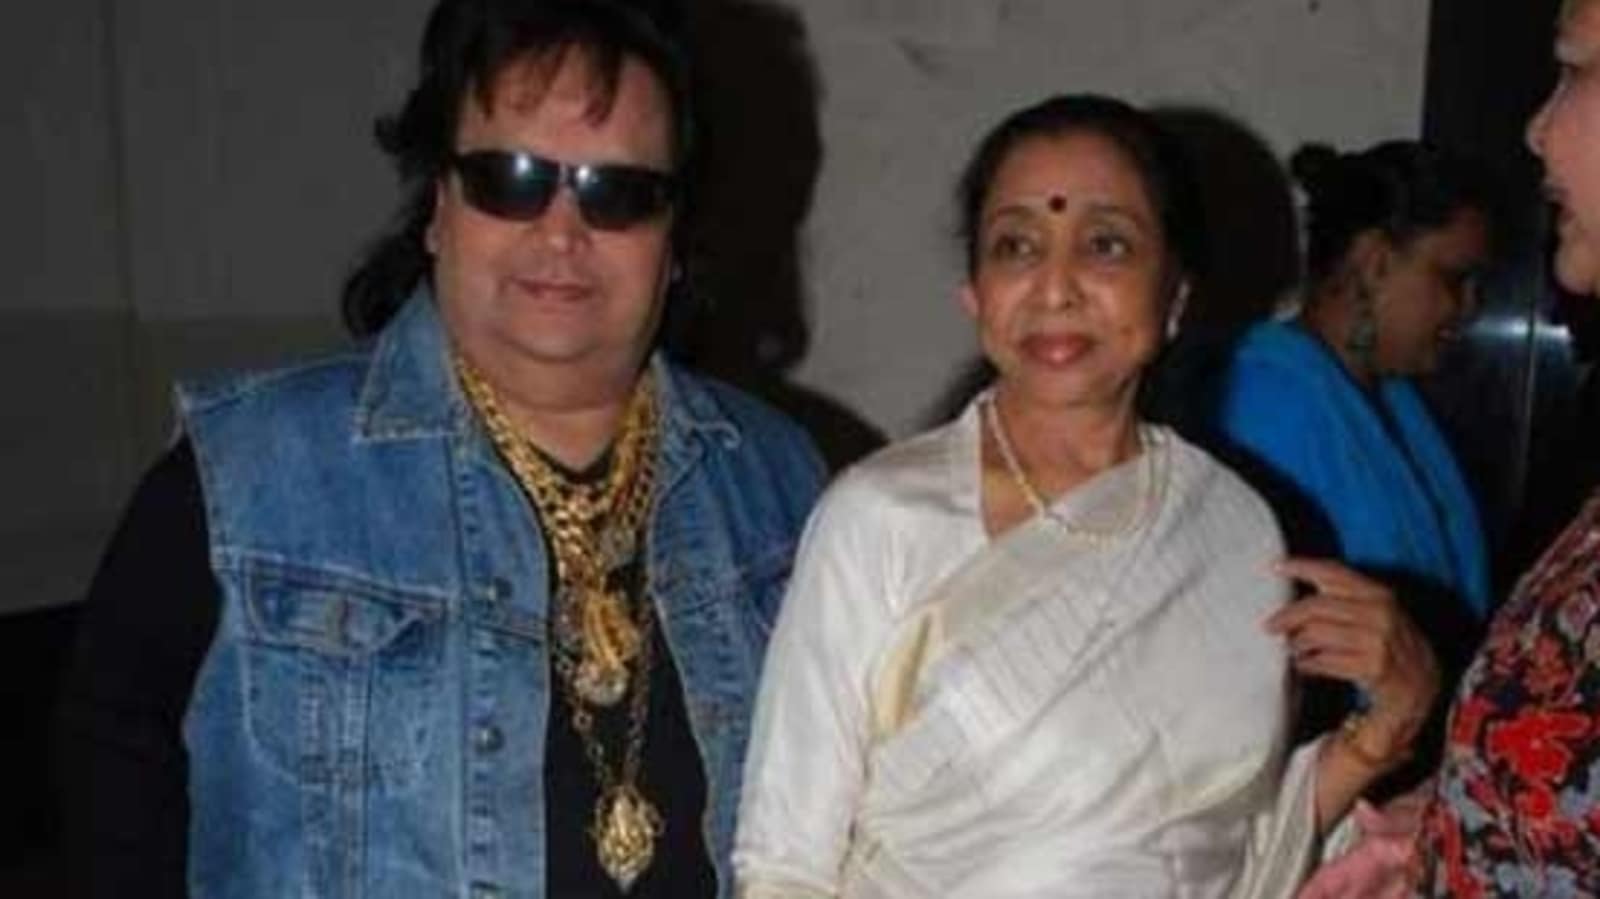 Asha Bhosle says she wanted to meet Bappi Lahiri, recalls being told ‘if something happens to him, you will be blamed’